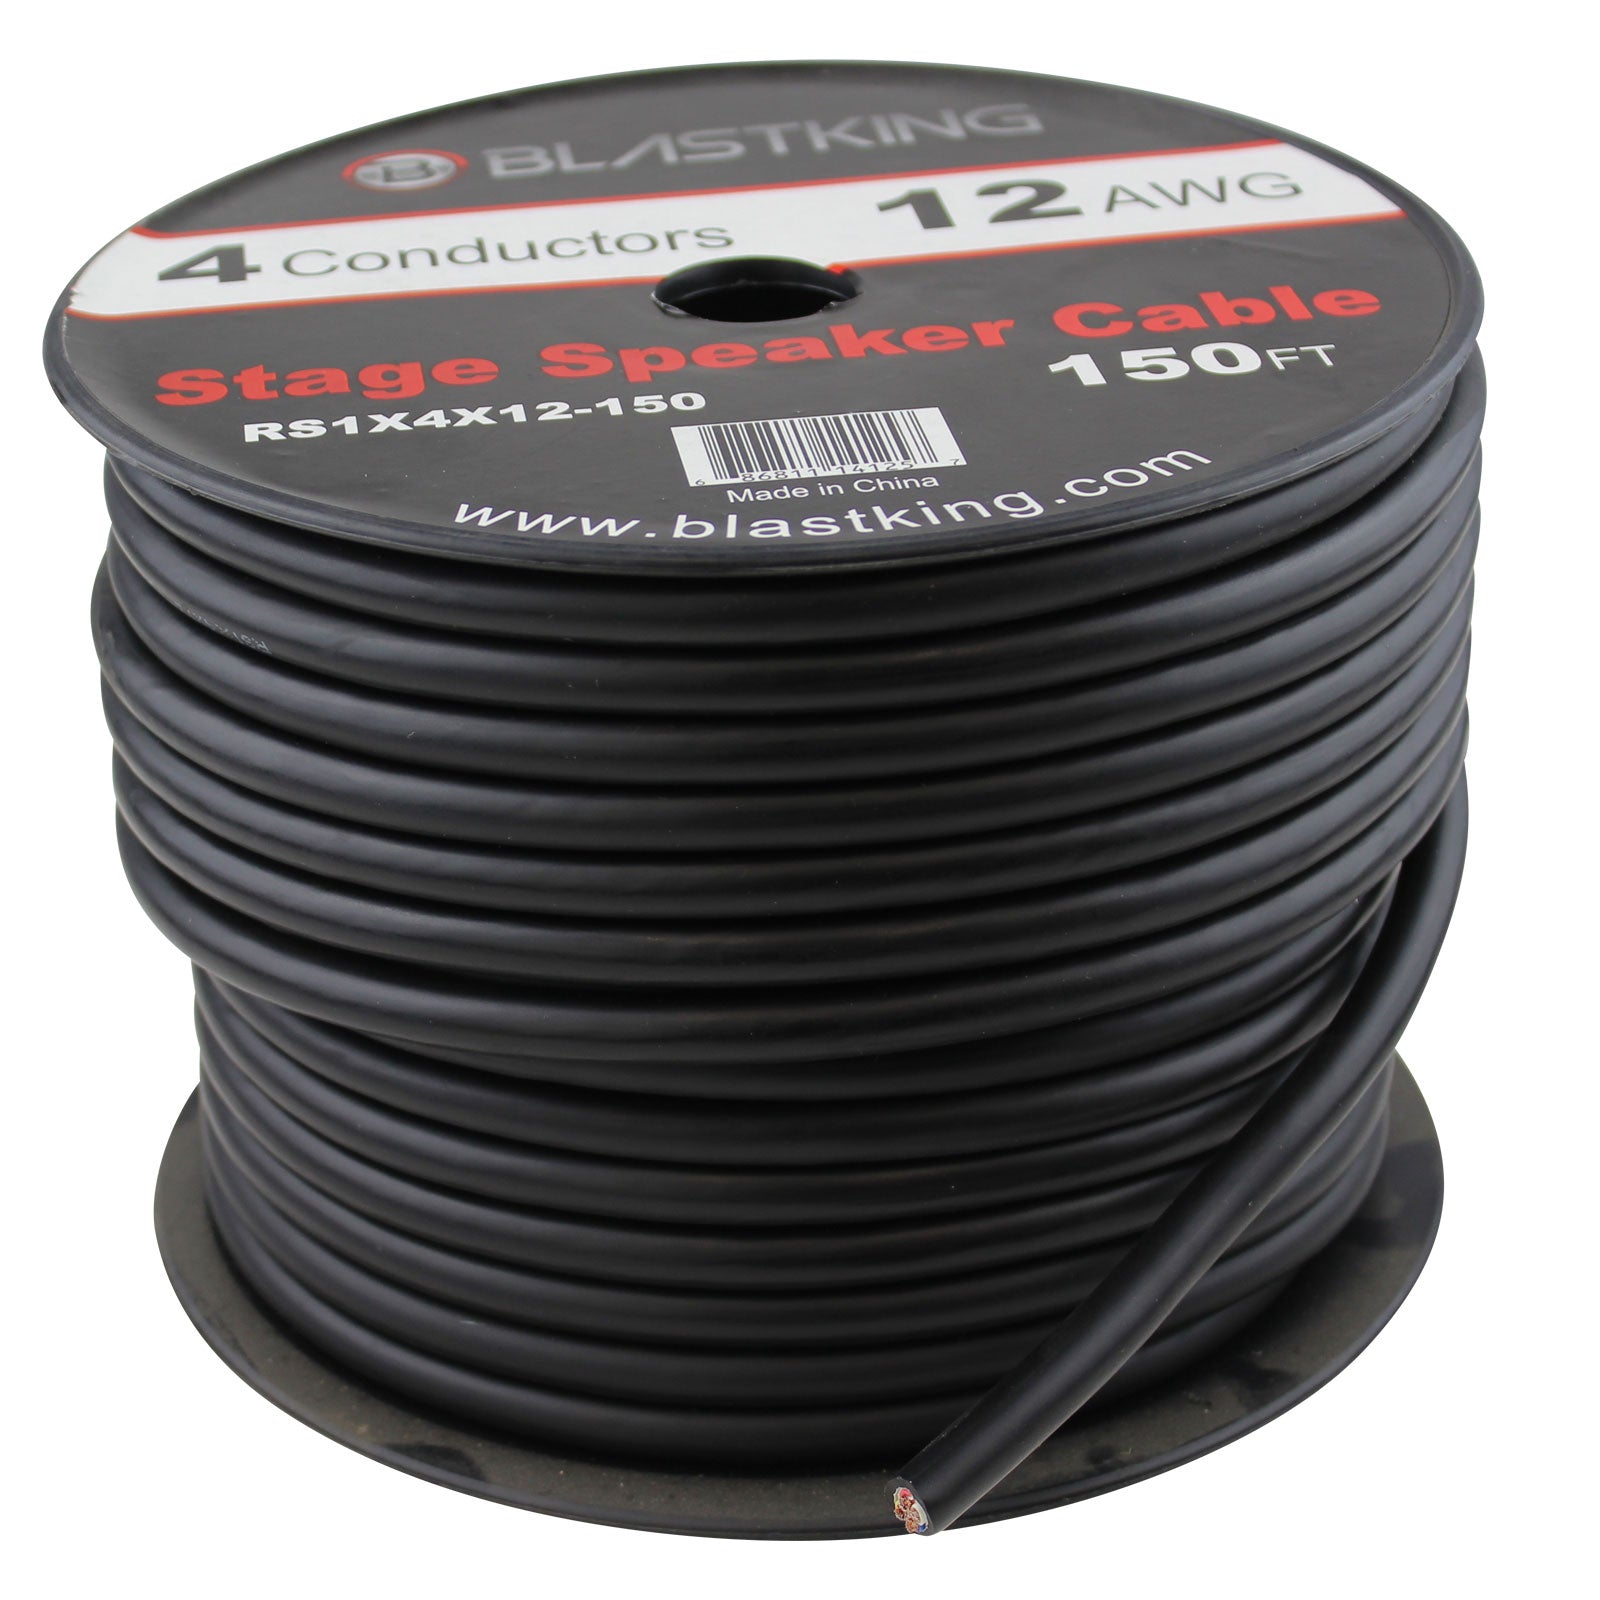 Blastking RS1X4X12-150 12 AWG 4-Conductor Speaker Cable 150 Ft